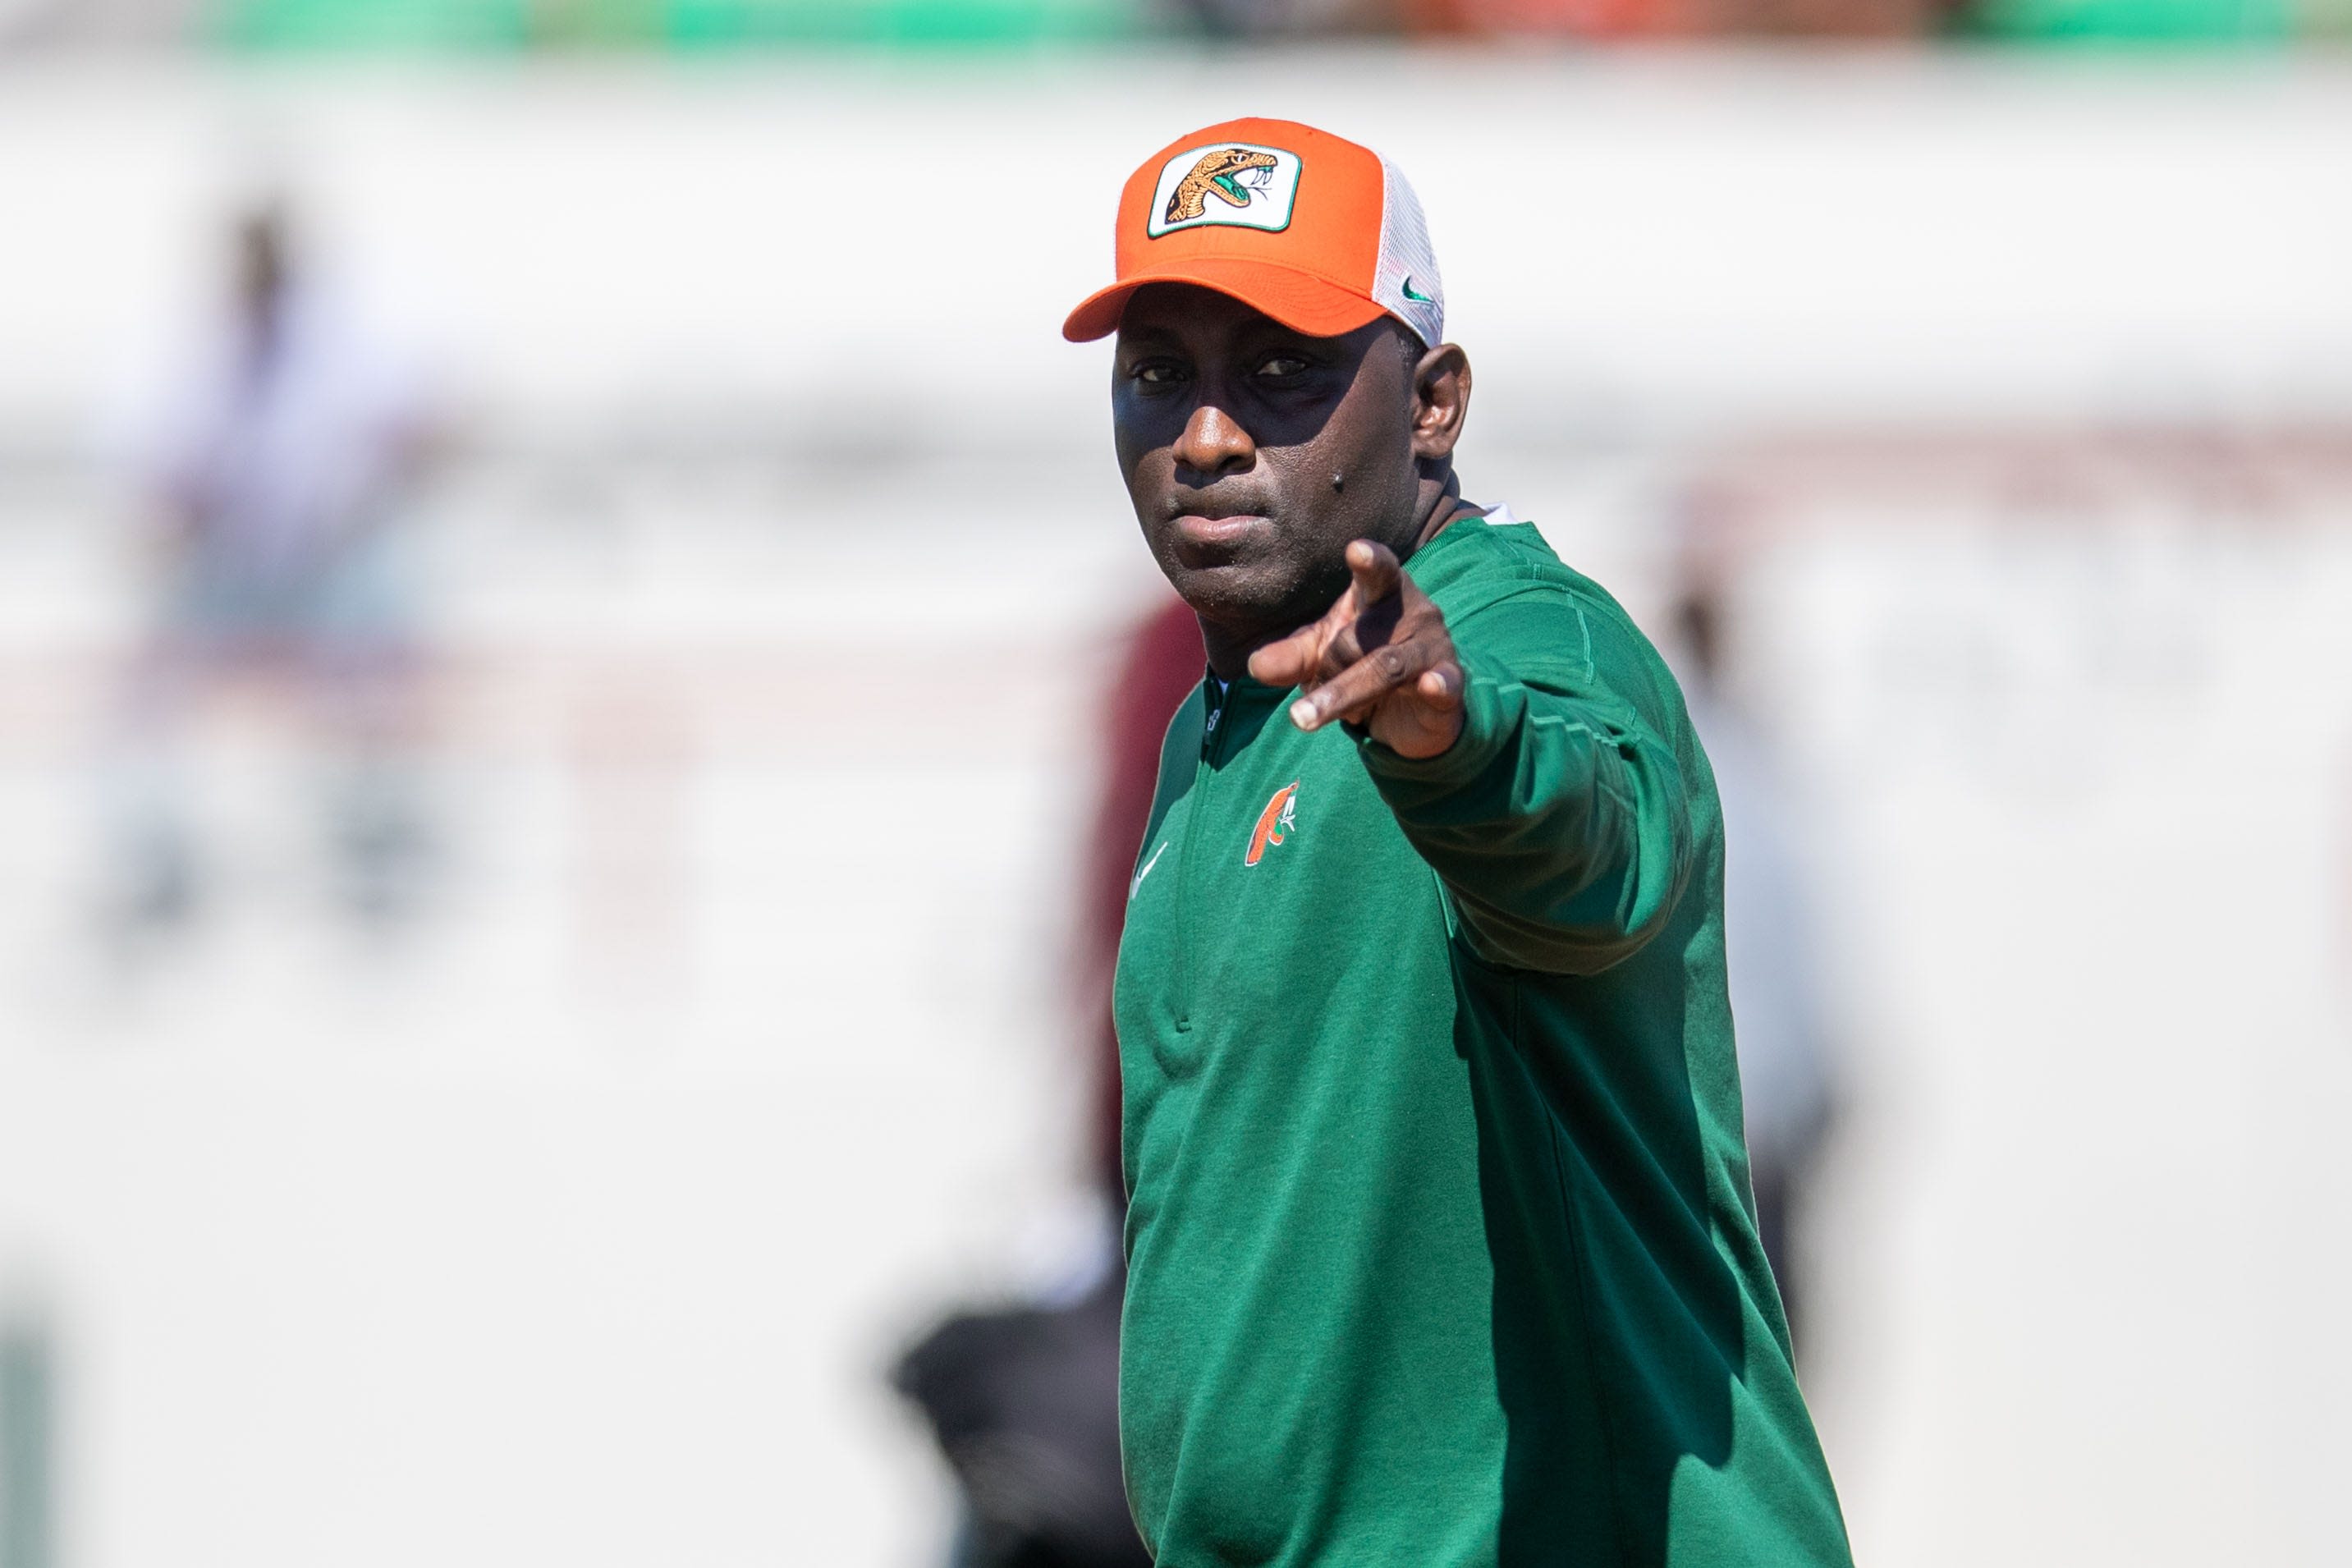 School's out. What's next for FAMU football? Head coach James Colzie III provides update